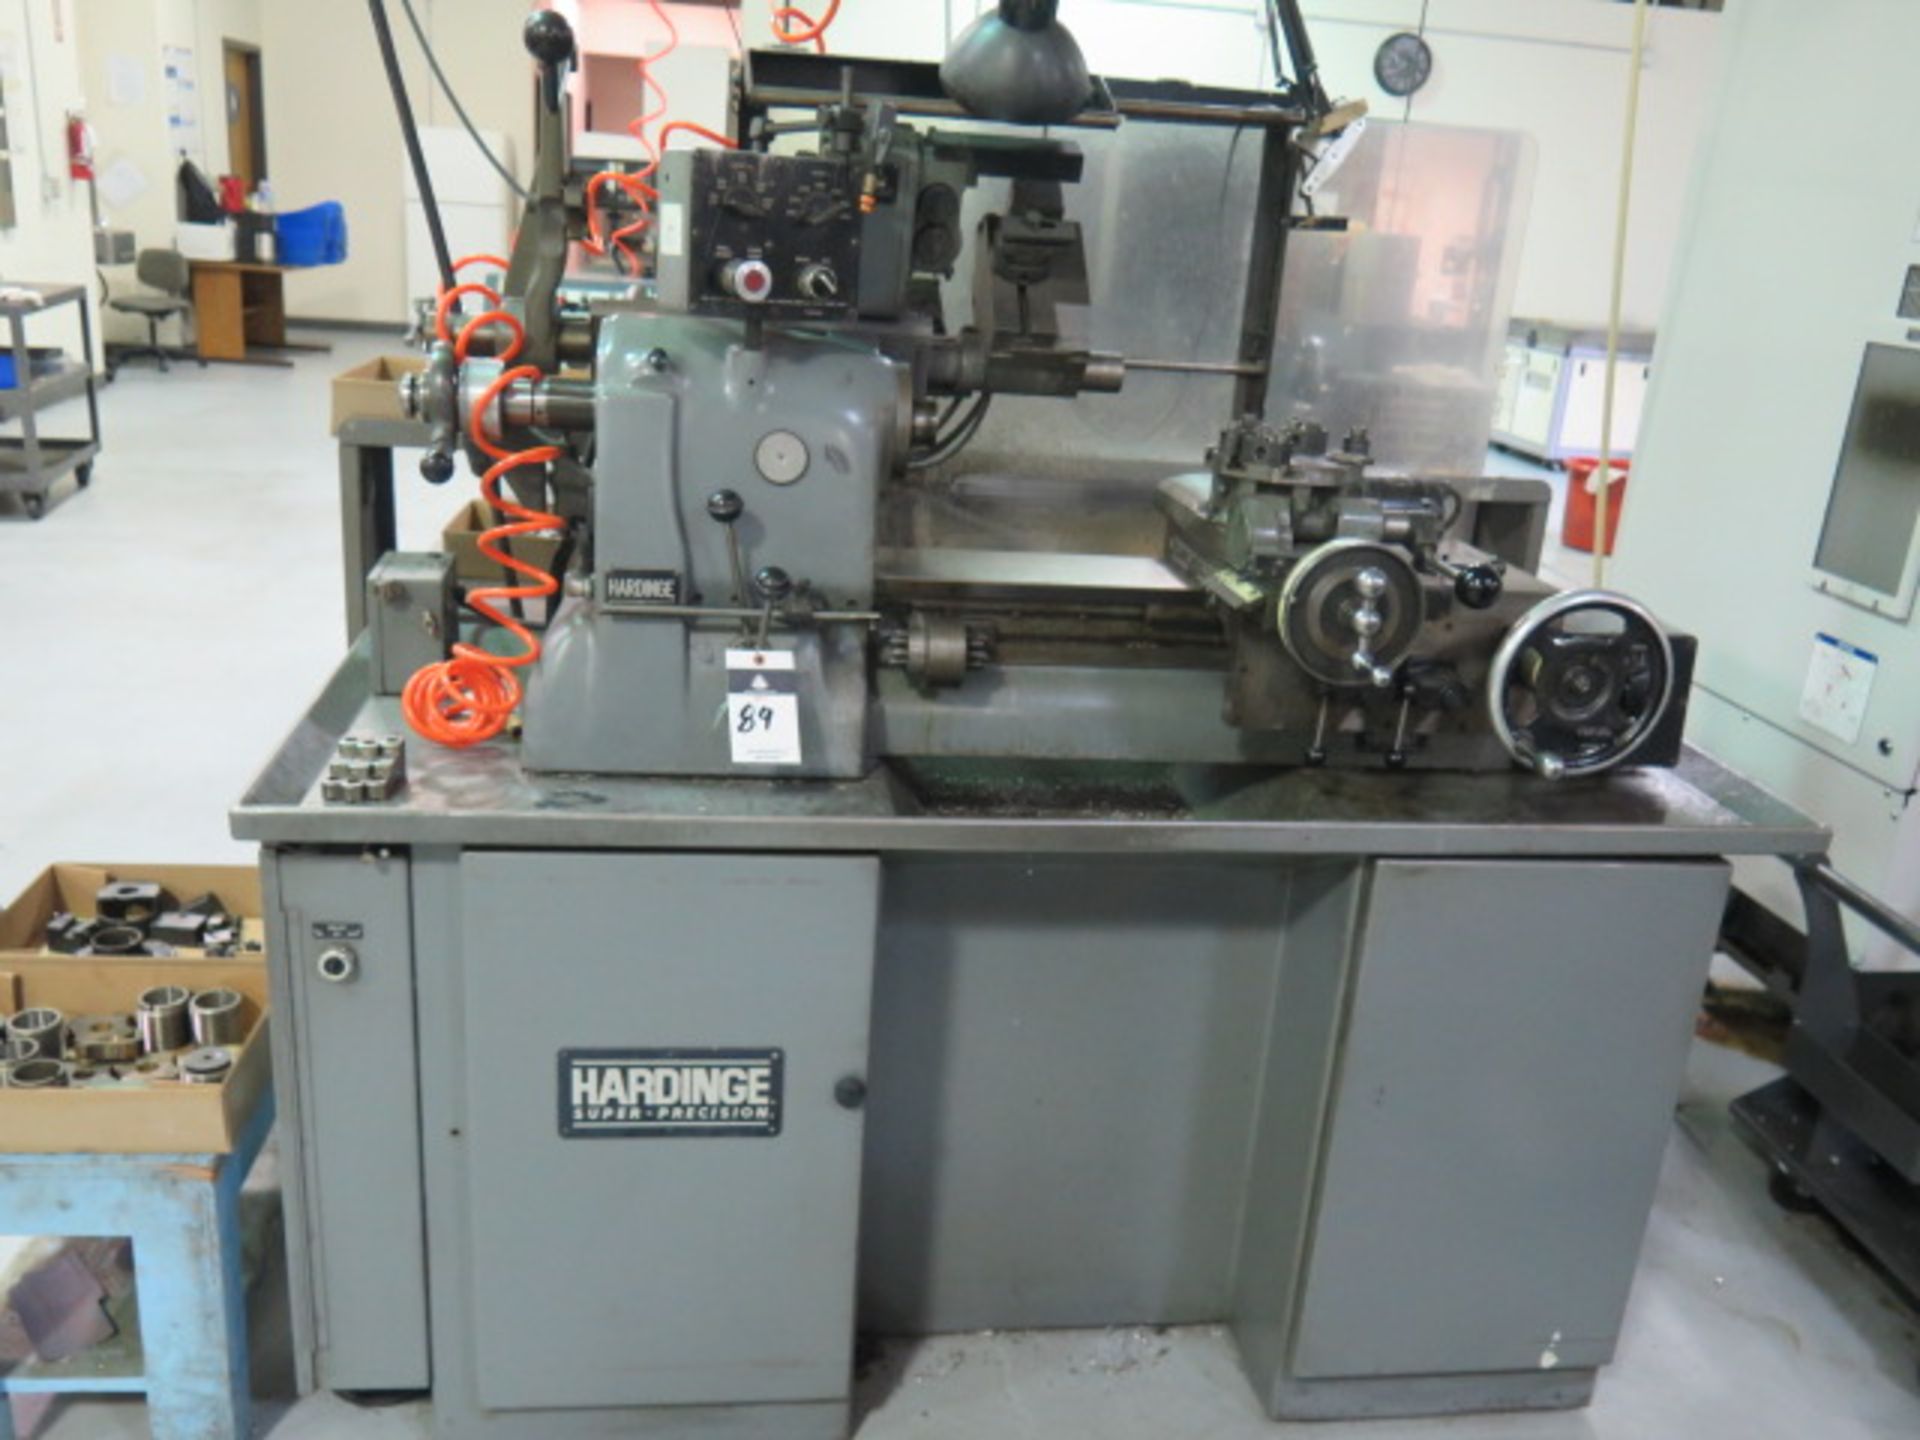 Hardinge HC Hand Chucker s/n HC-6914-T w/ Threading Attachment, Chasers and Followers, 125-3000 RPM,